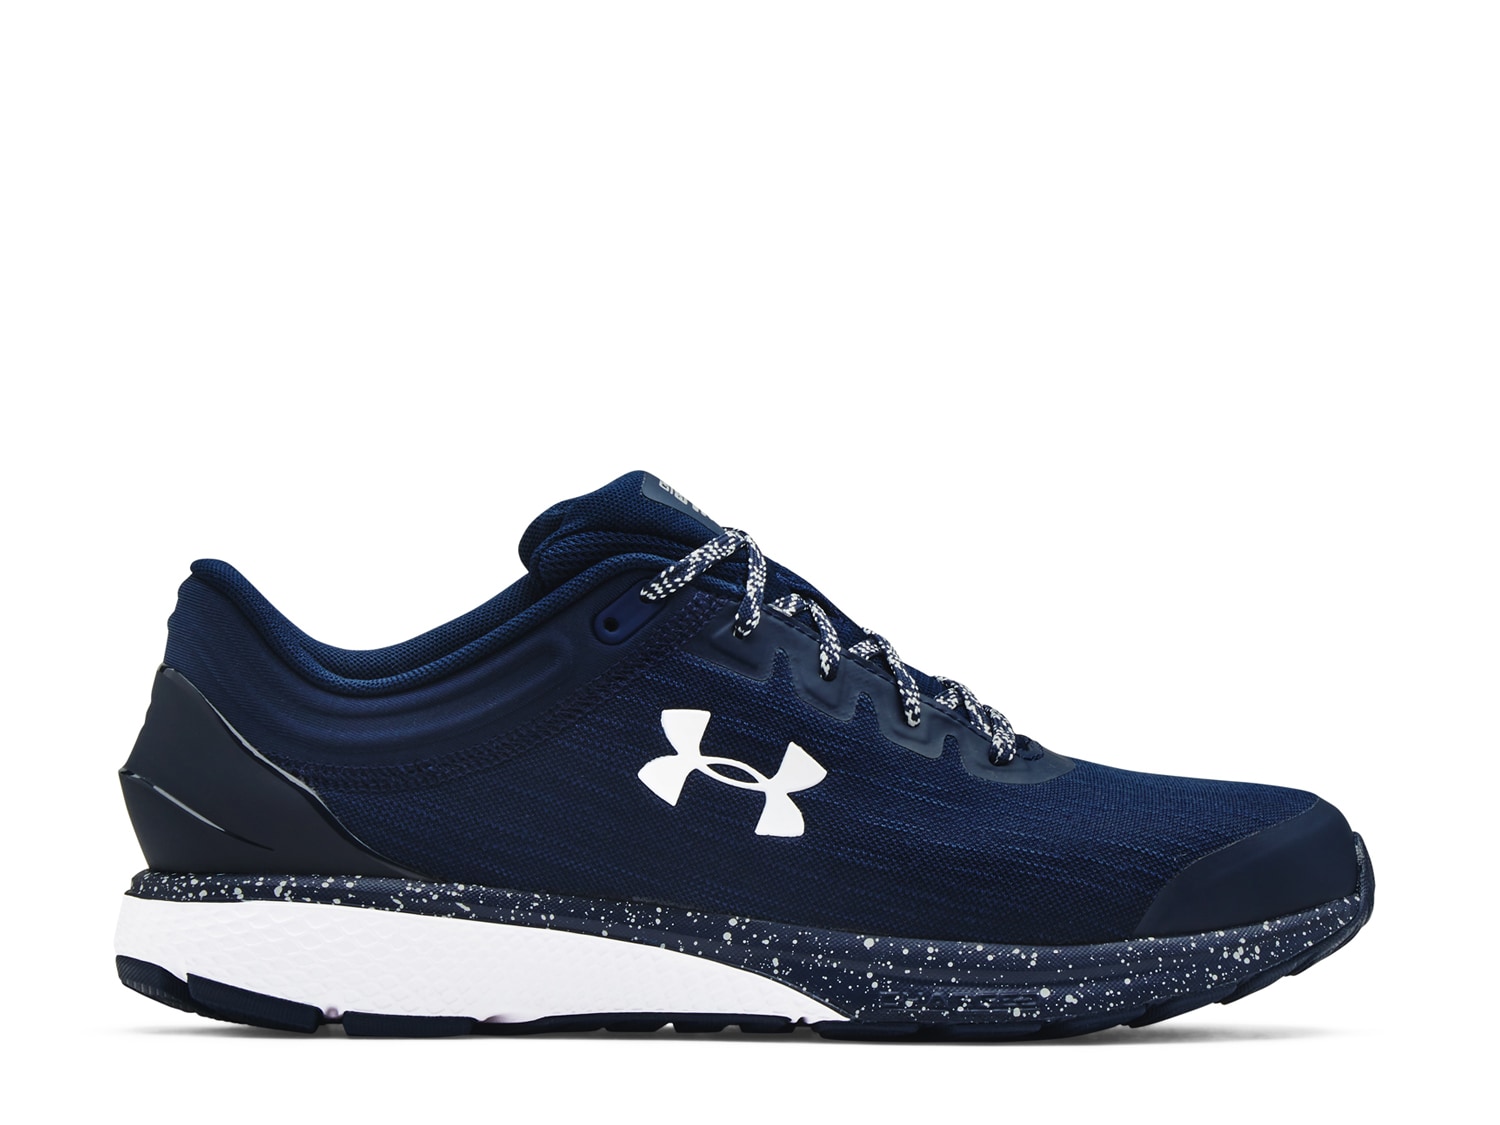 Under Armour Men's Charged Escape 4 Lightweight Mesh Running Shoes